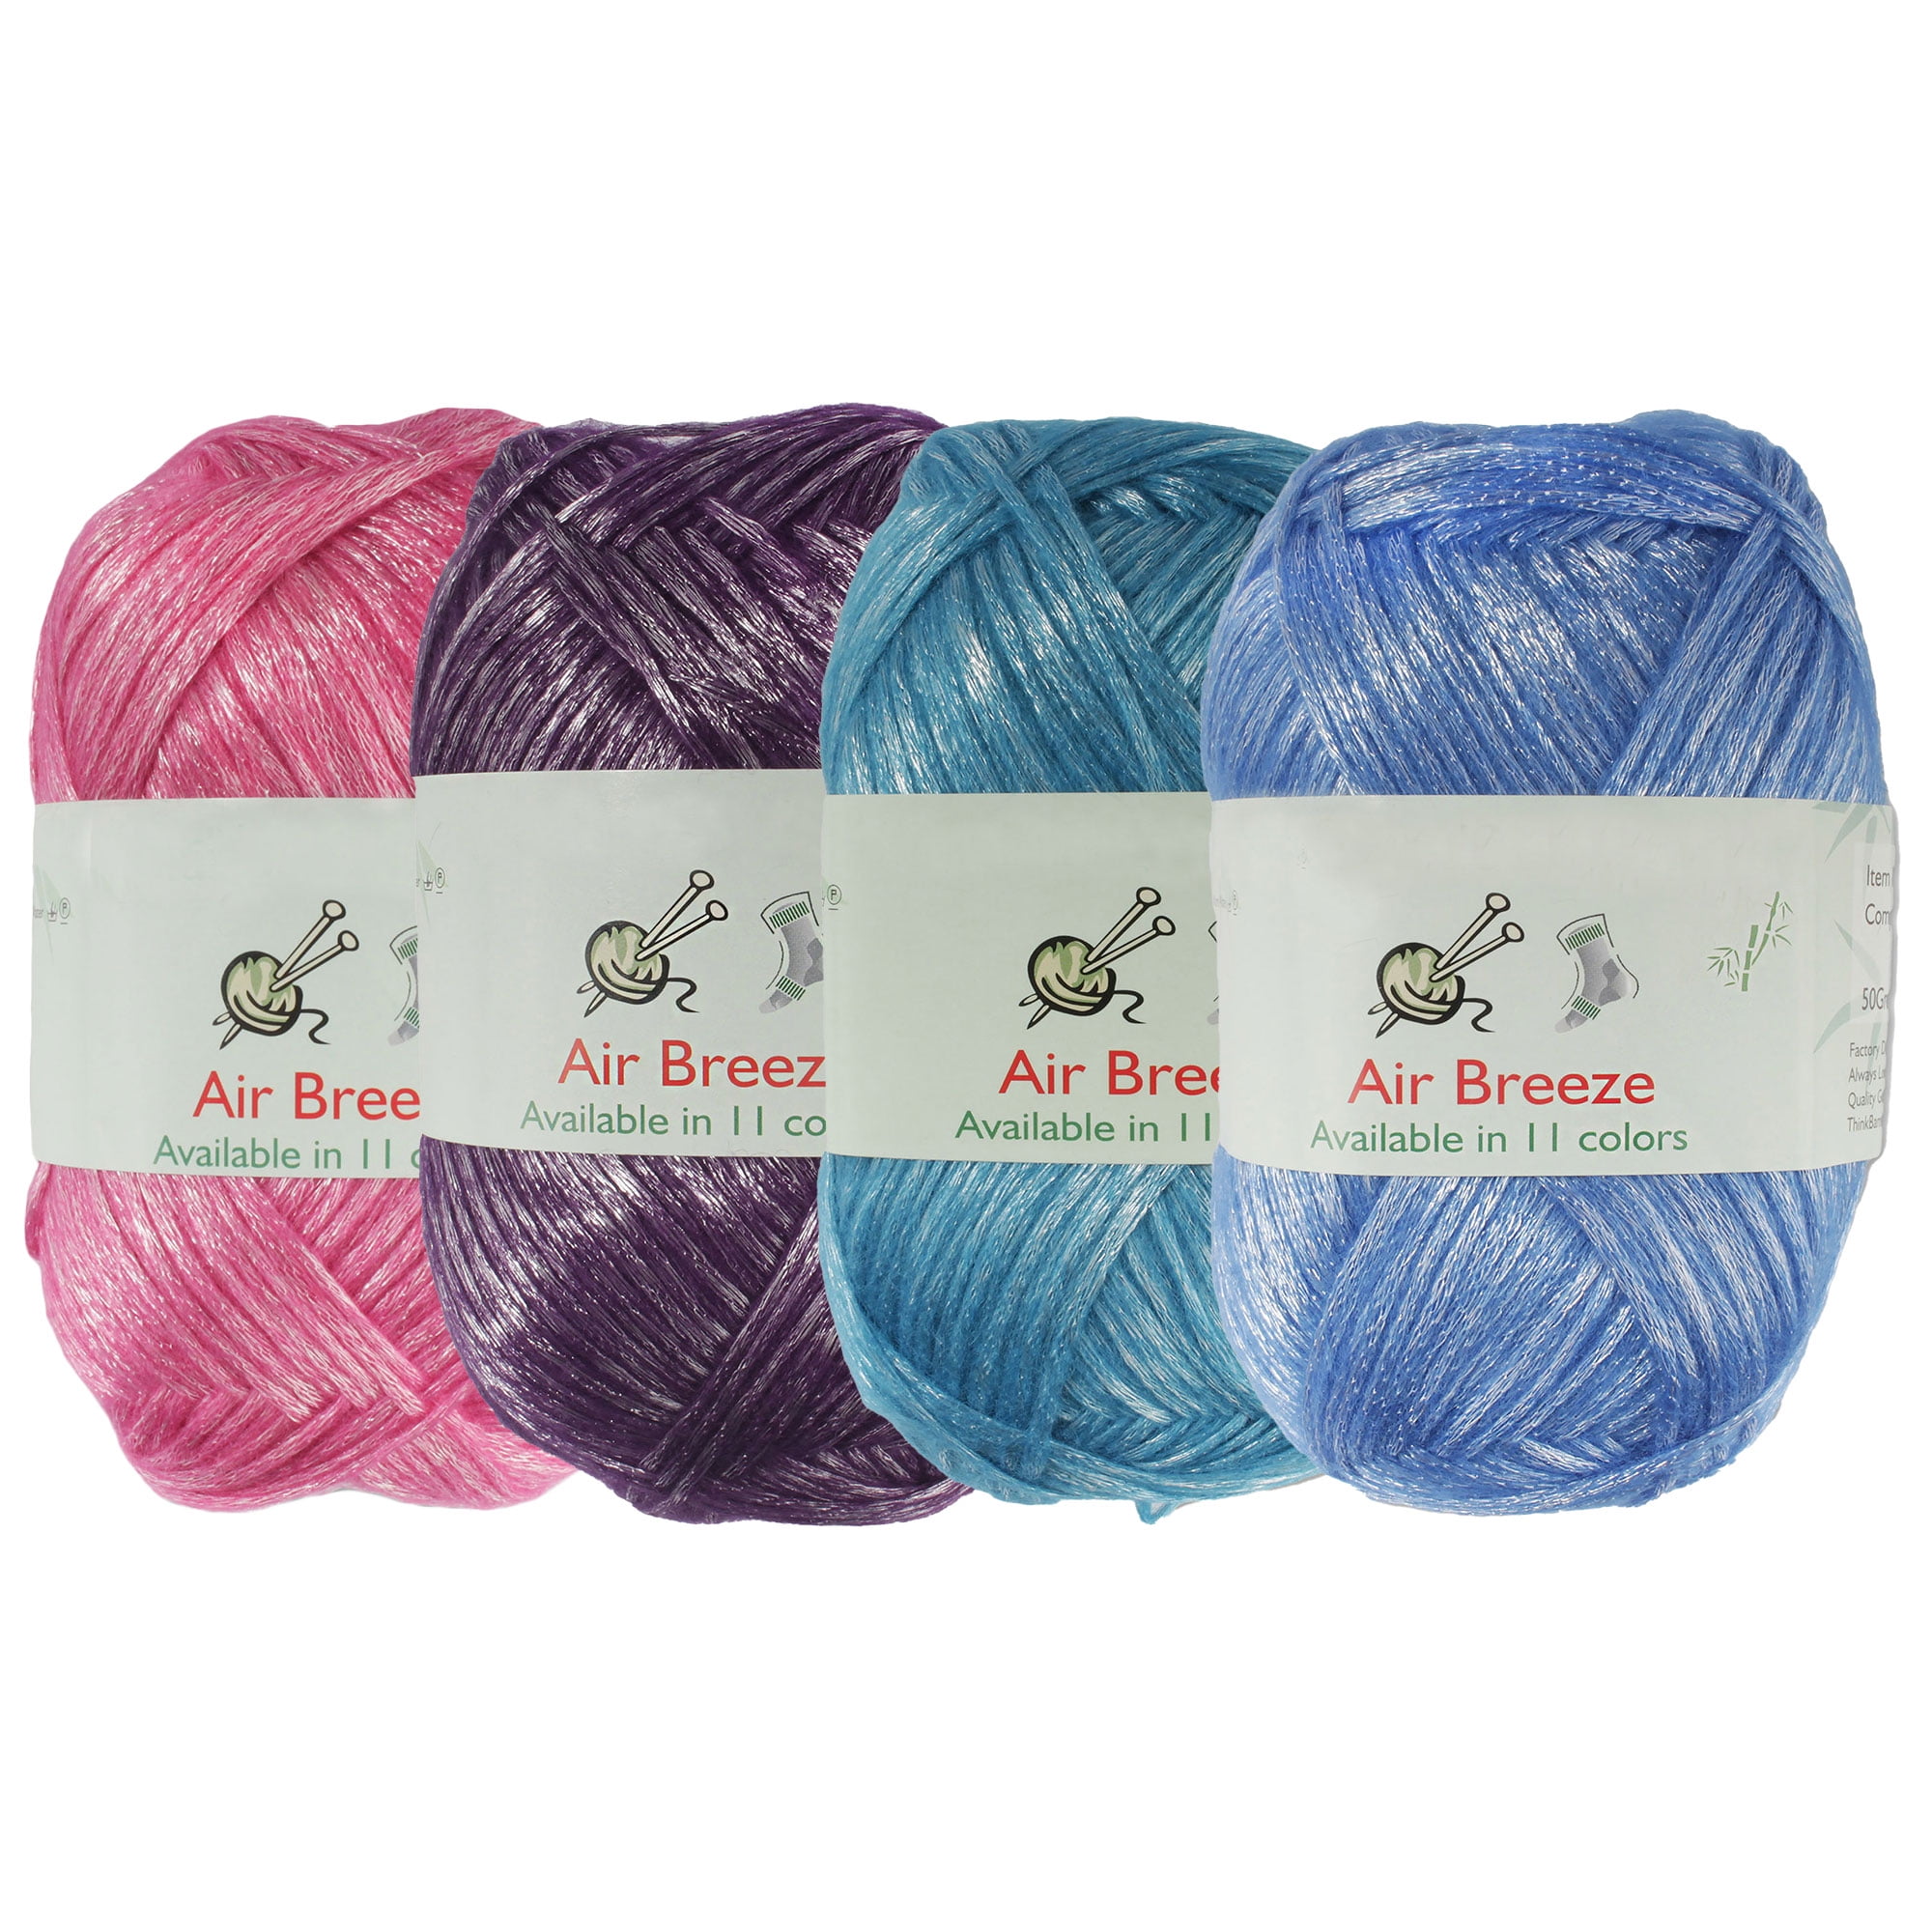 Cotton to The Core Medium Weight Extra Soft Baby Cotton Blend Yarn for Knitting Crocheting Blankets, Two-Tone, 3 Skeins, 654yds/300g (Blueberry Blue)